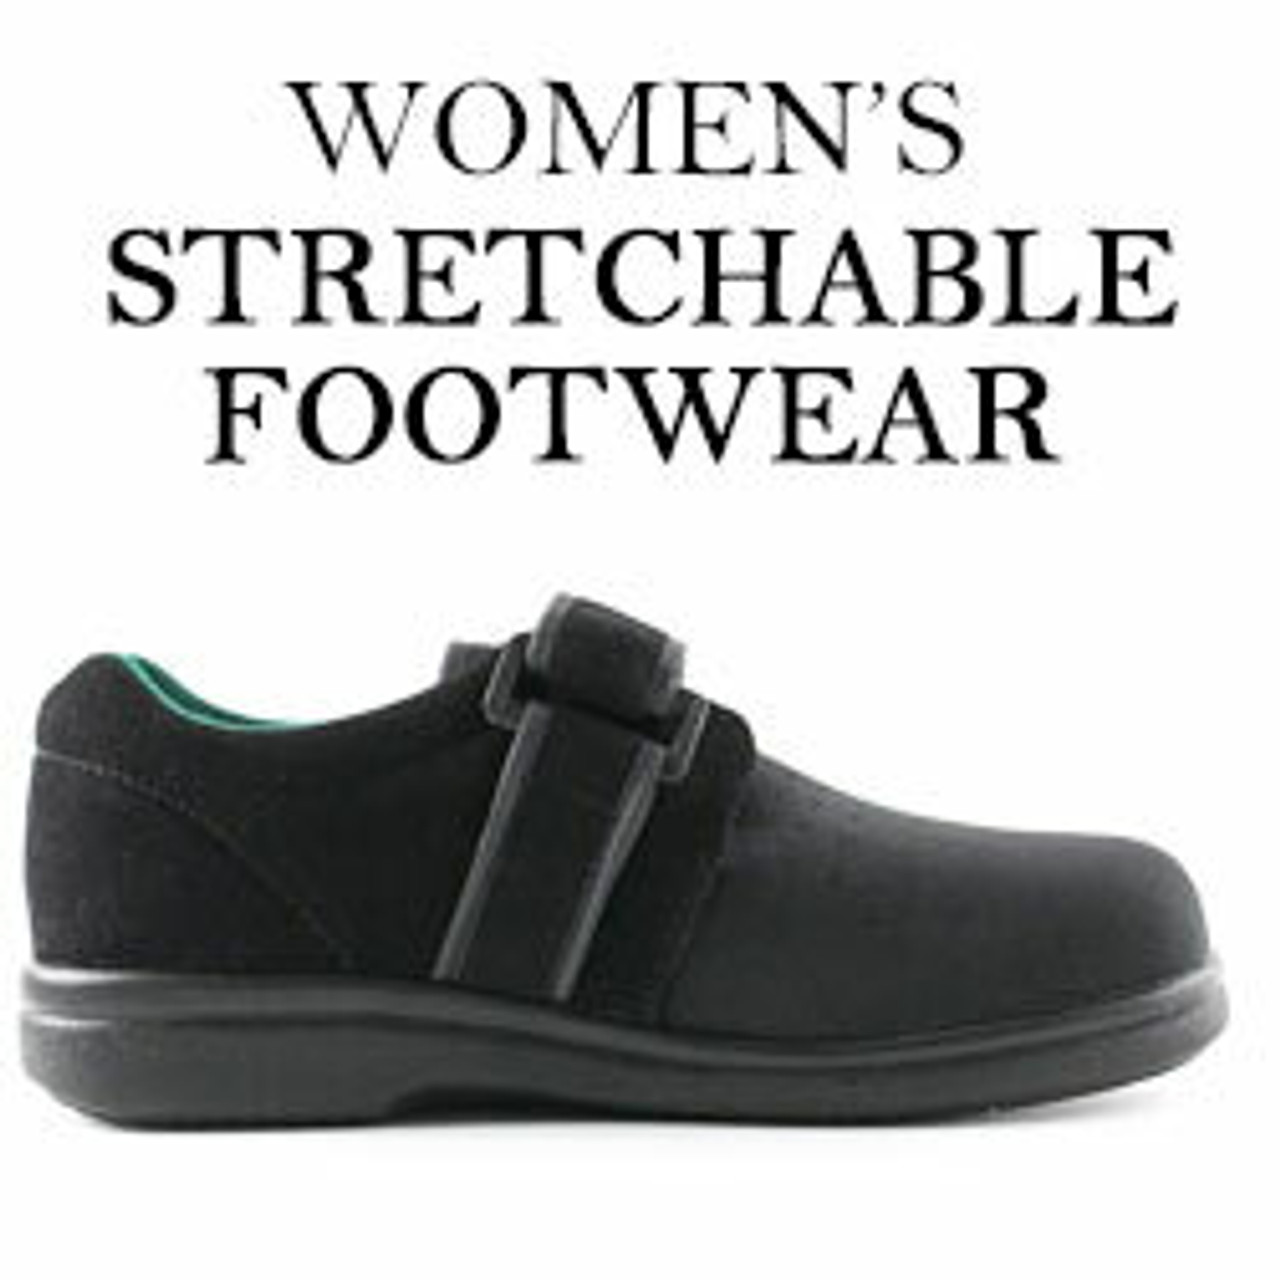 Best Stretchy Shoes for Women